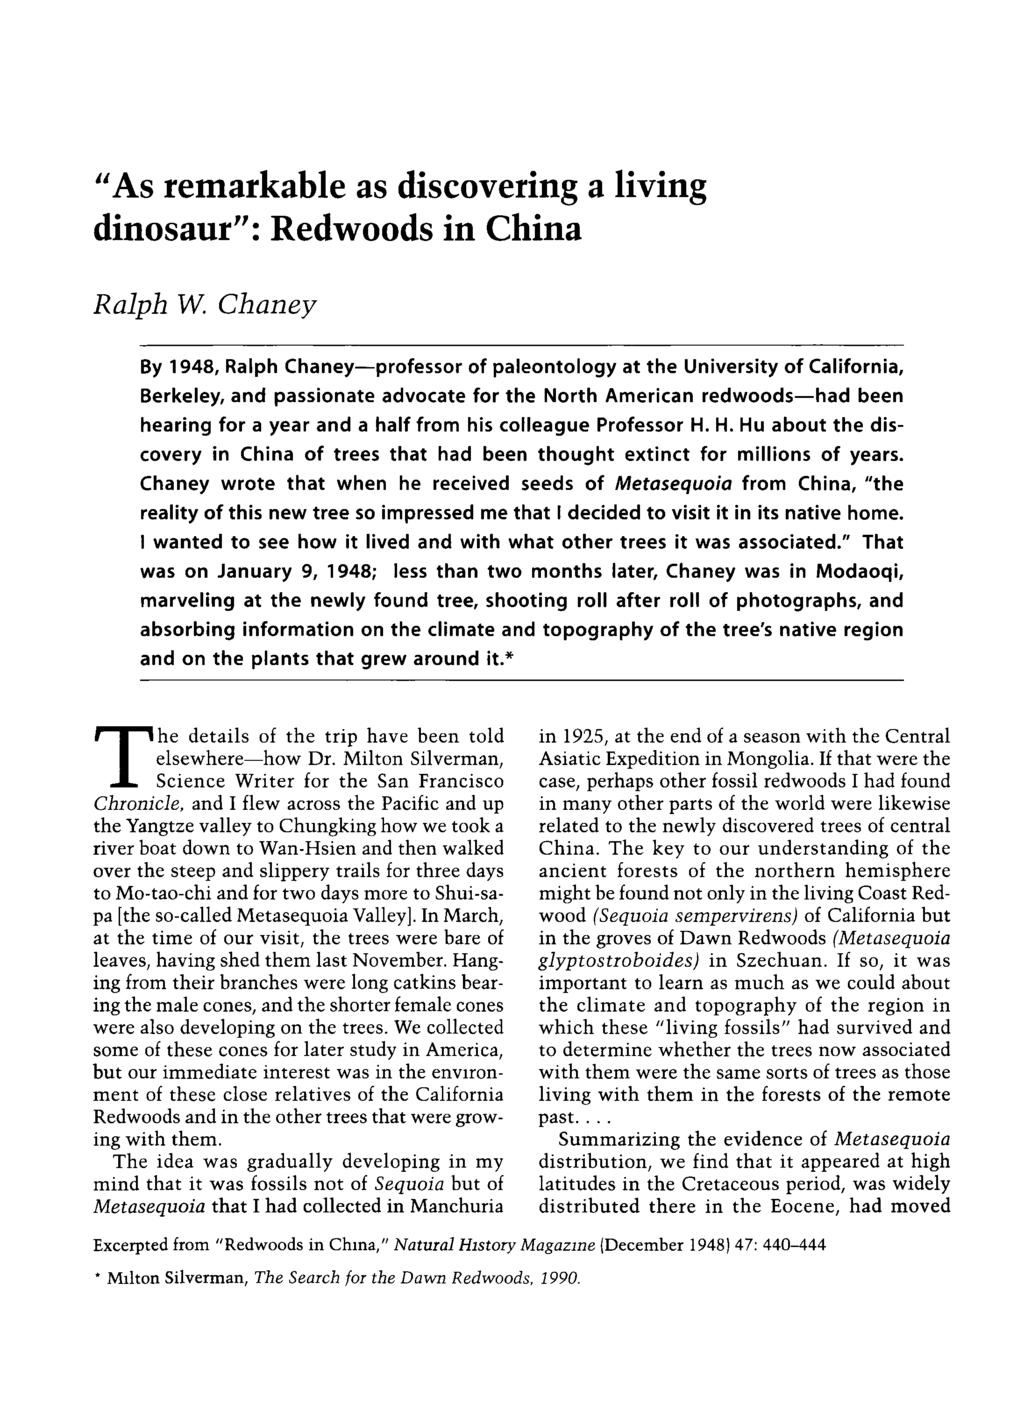 "As remarkable as discovering a living dinosaur": Redwoods in China Ralph W Chaney By 1948, Ralph Chaney-professor of paleontology at the University of California, Berkeley, and passionate advocate